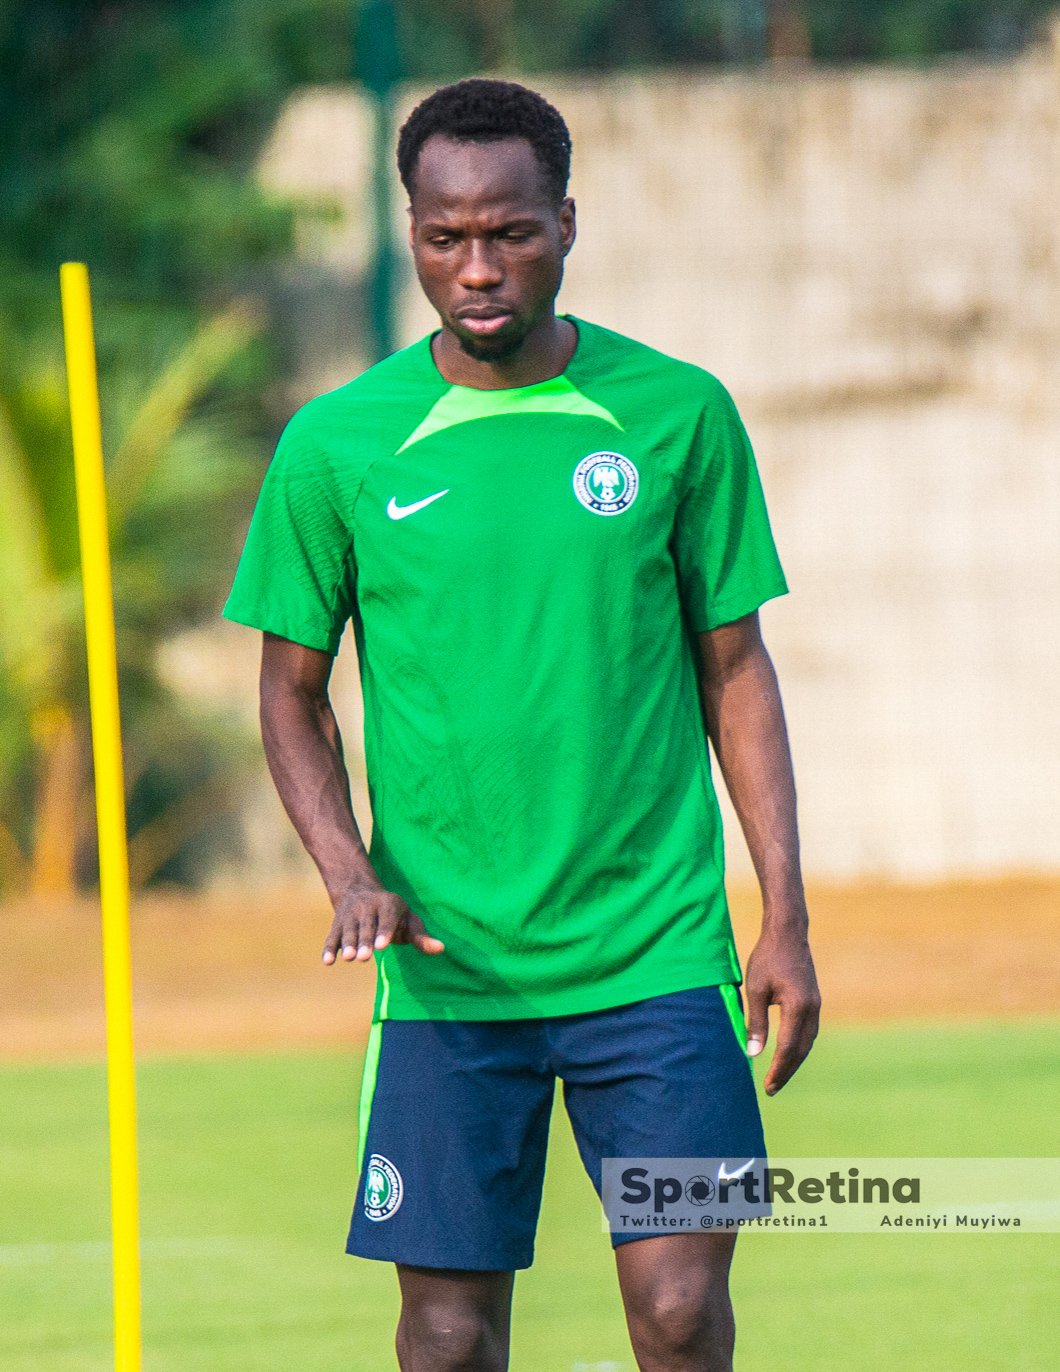 AFCON 2023: Troost Ekong, Alhassan Yusuf return to full training